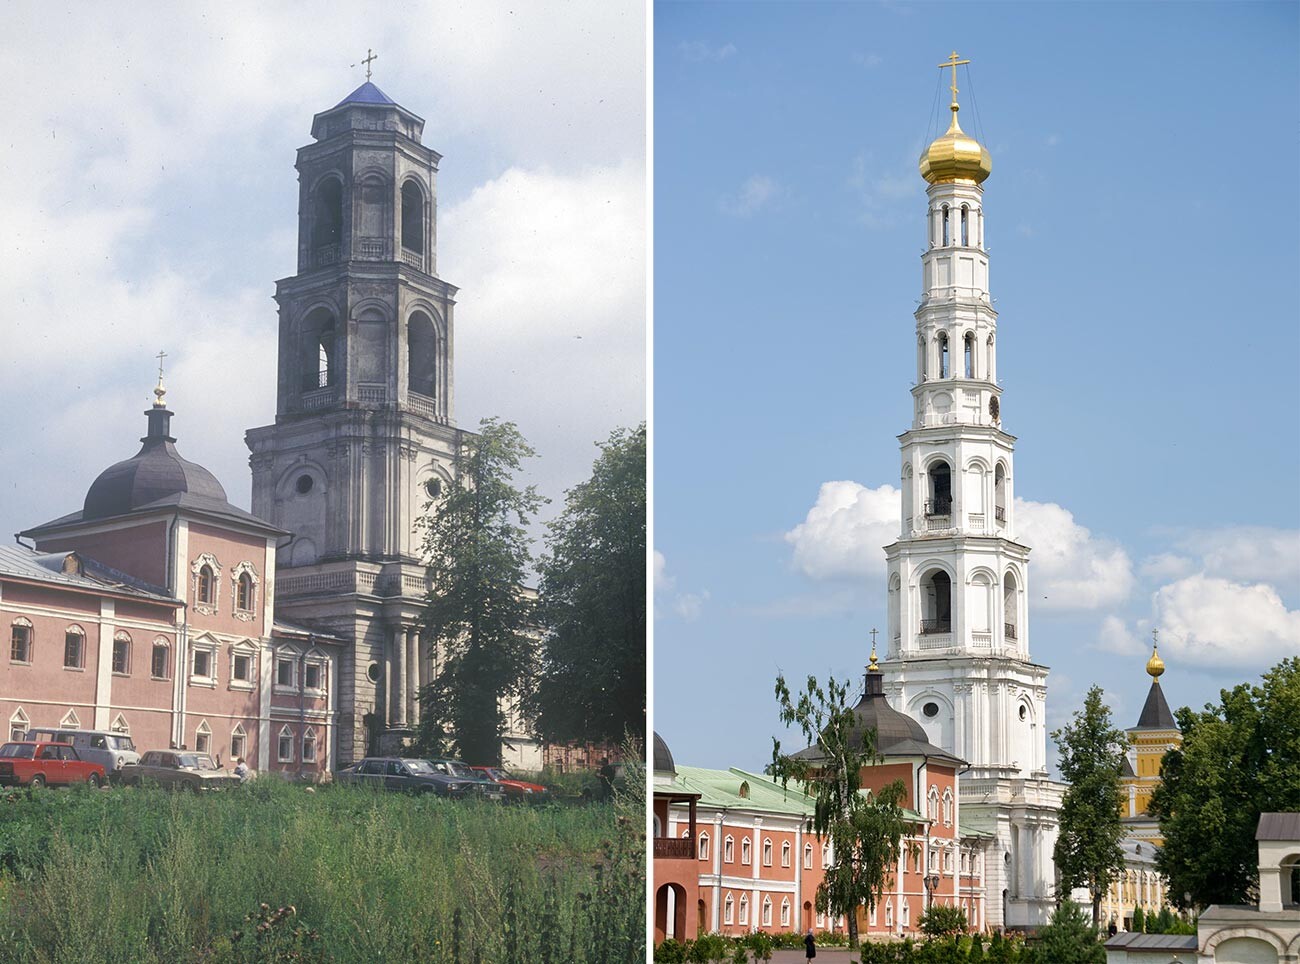 Left: St. Nicholas-Ugreshky Monastery. Church of the Dormition. Southwest view with original 18th-century bell tower containing Church of Decapitation of John the Baptist. August 4, 1996
Right: Church & bell tower with two 19th-century tiers restored after demolition in Soviet period. July 10, 2013